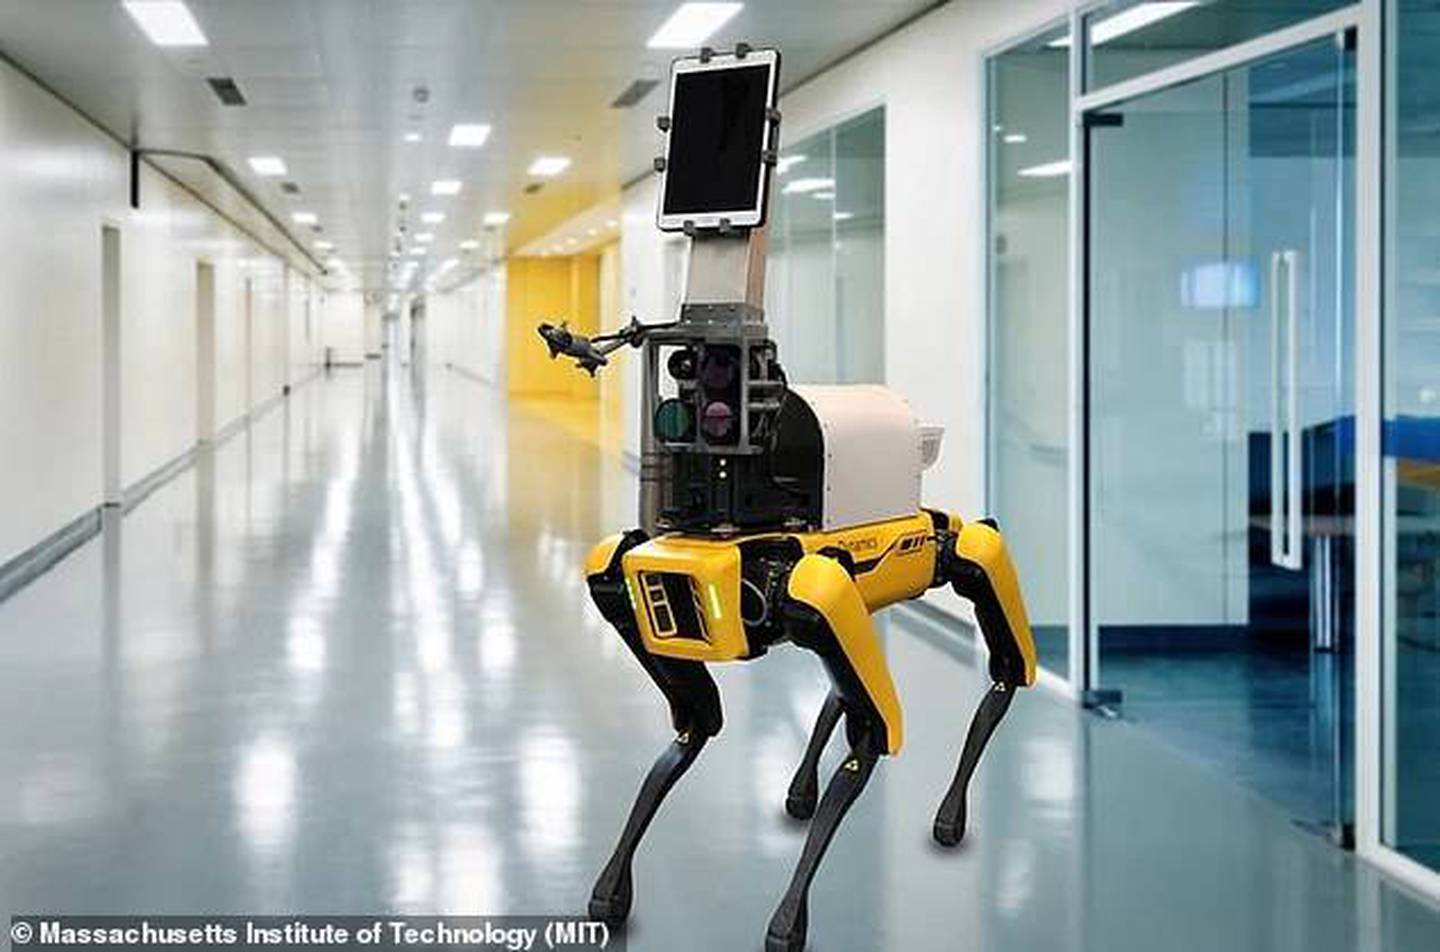 Viral video: How does a dog react when meeting a robot dog?